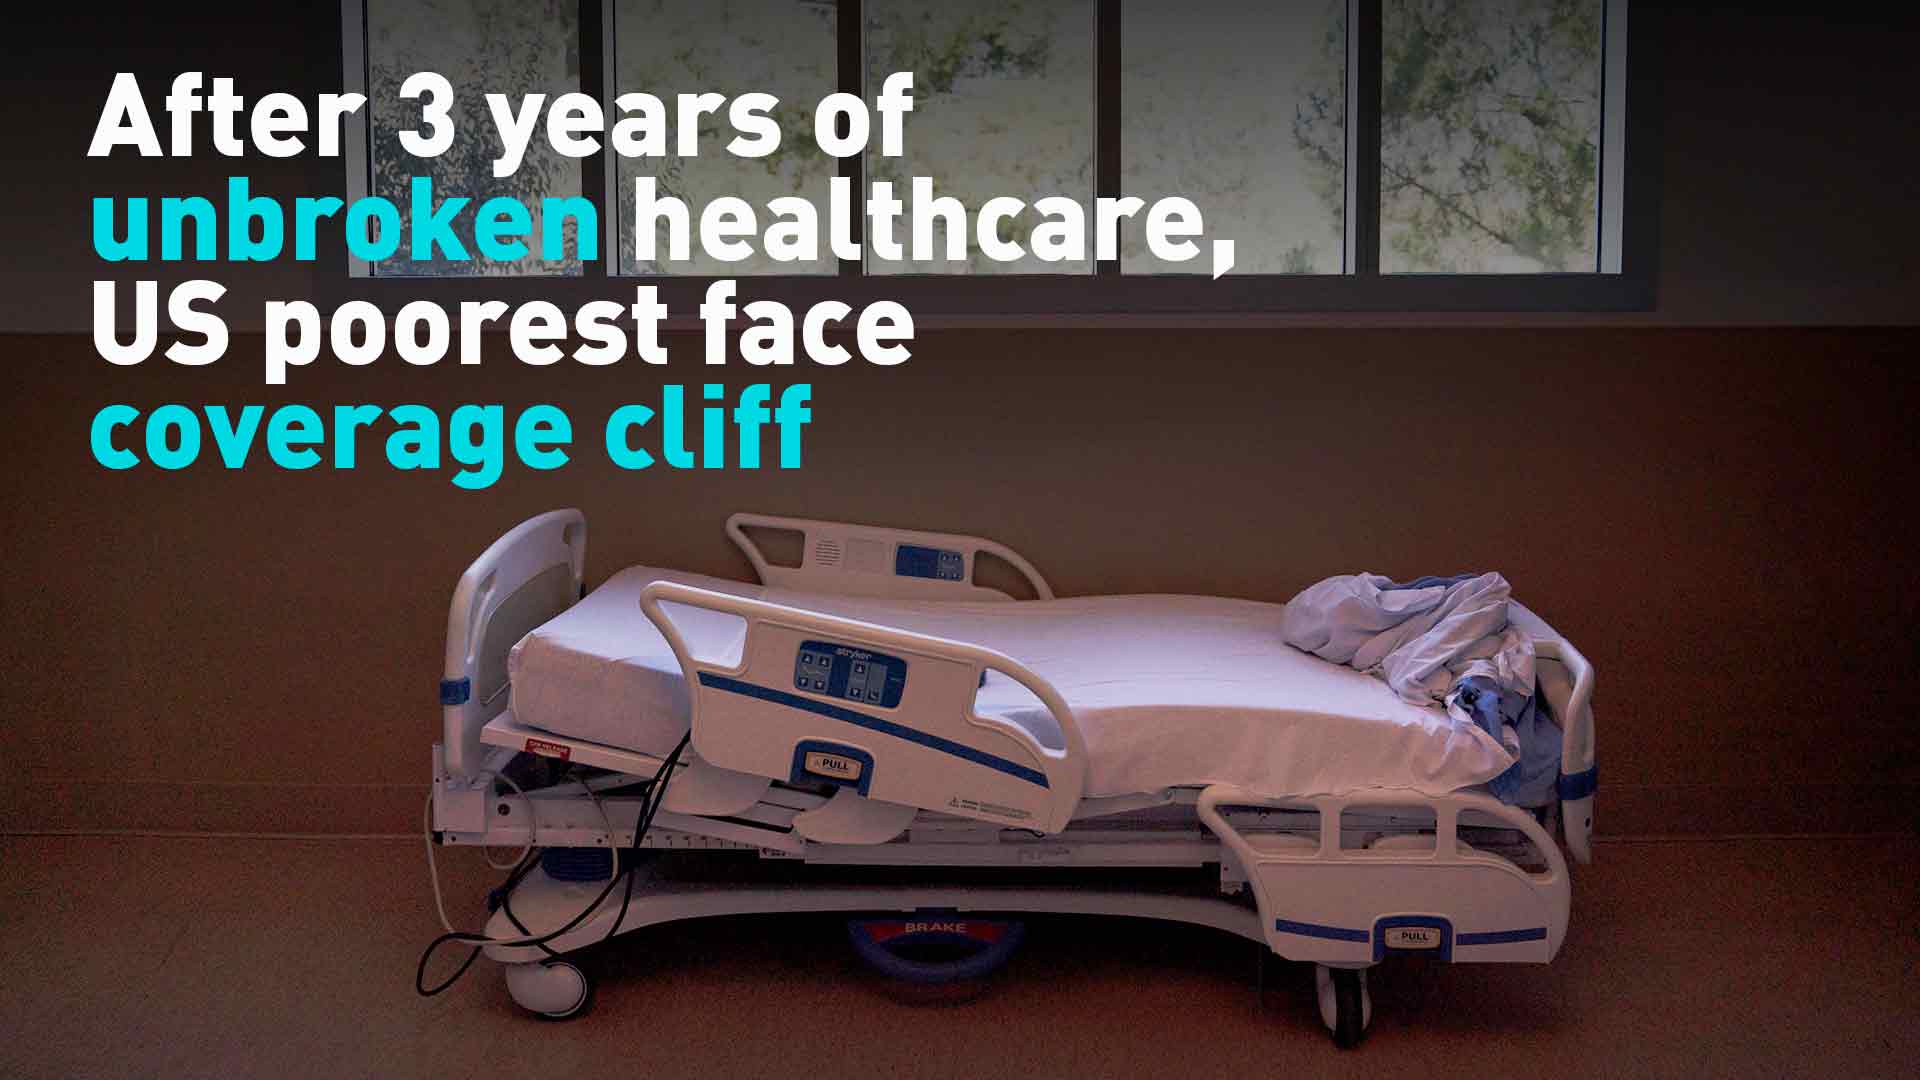 After 3 years of unbroken healthcare, US poorest face coverage cliff